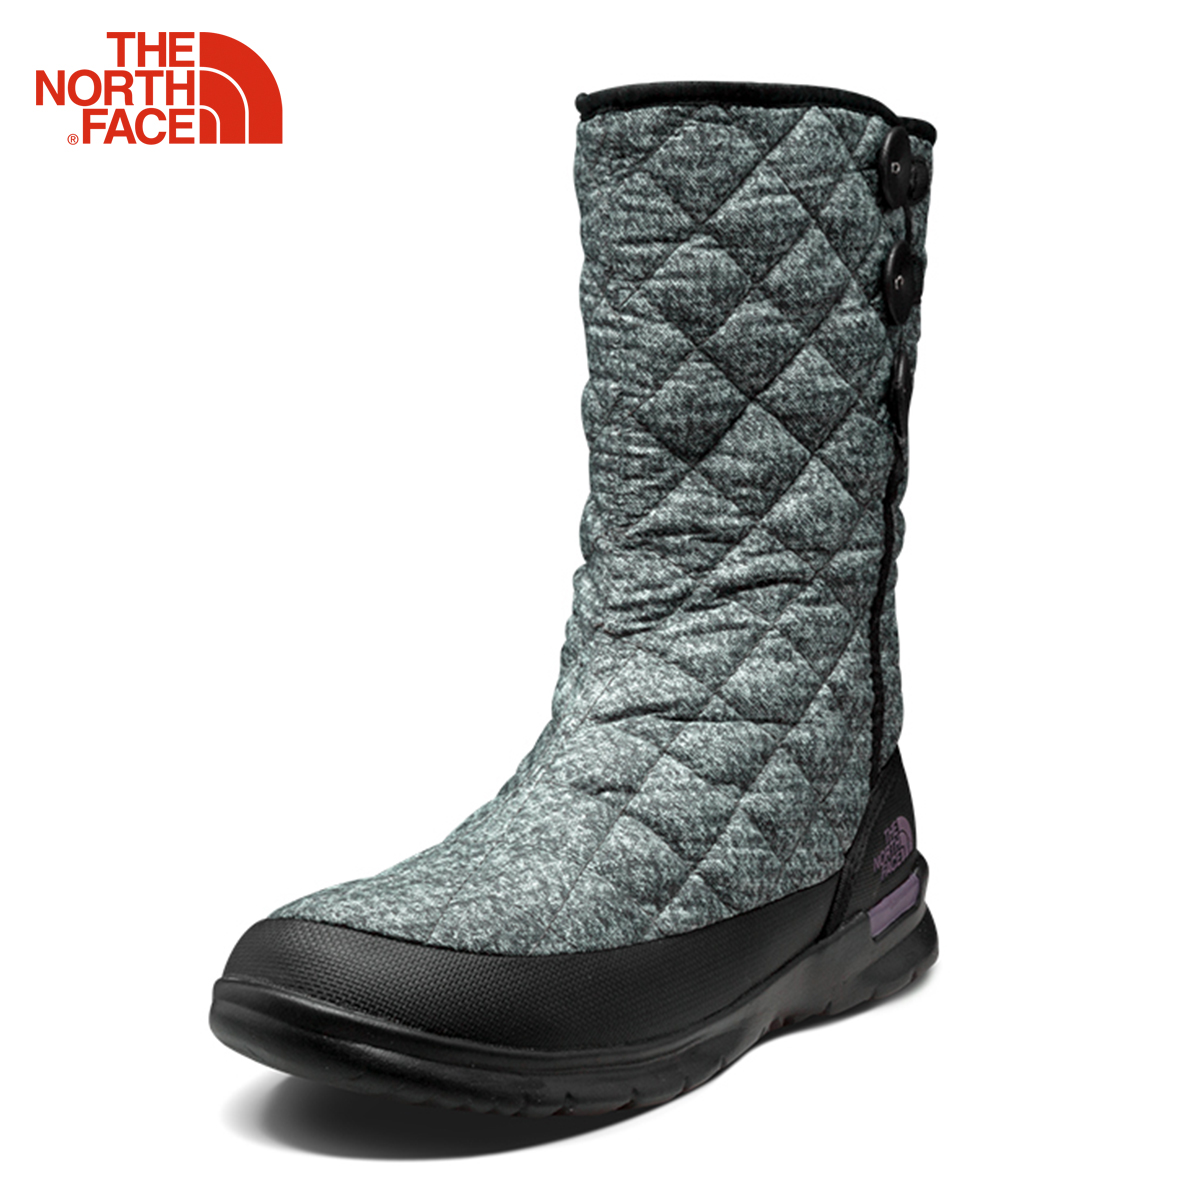 The North Face North Autumn and Winter Women's Shoes 2T5K/2T5M/2T5I